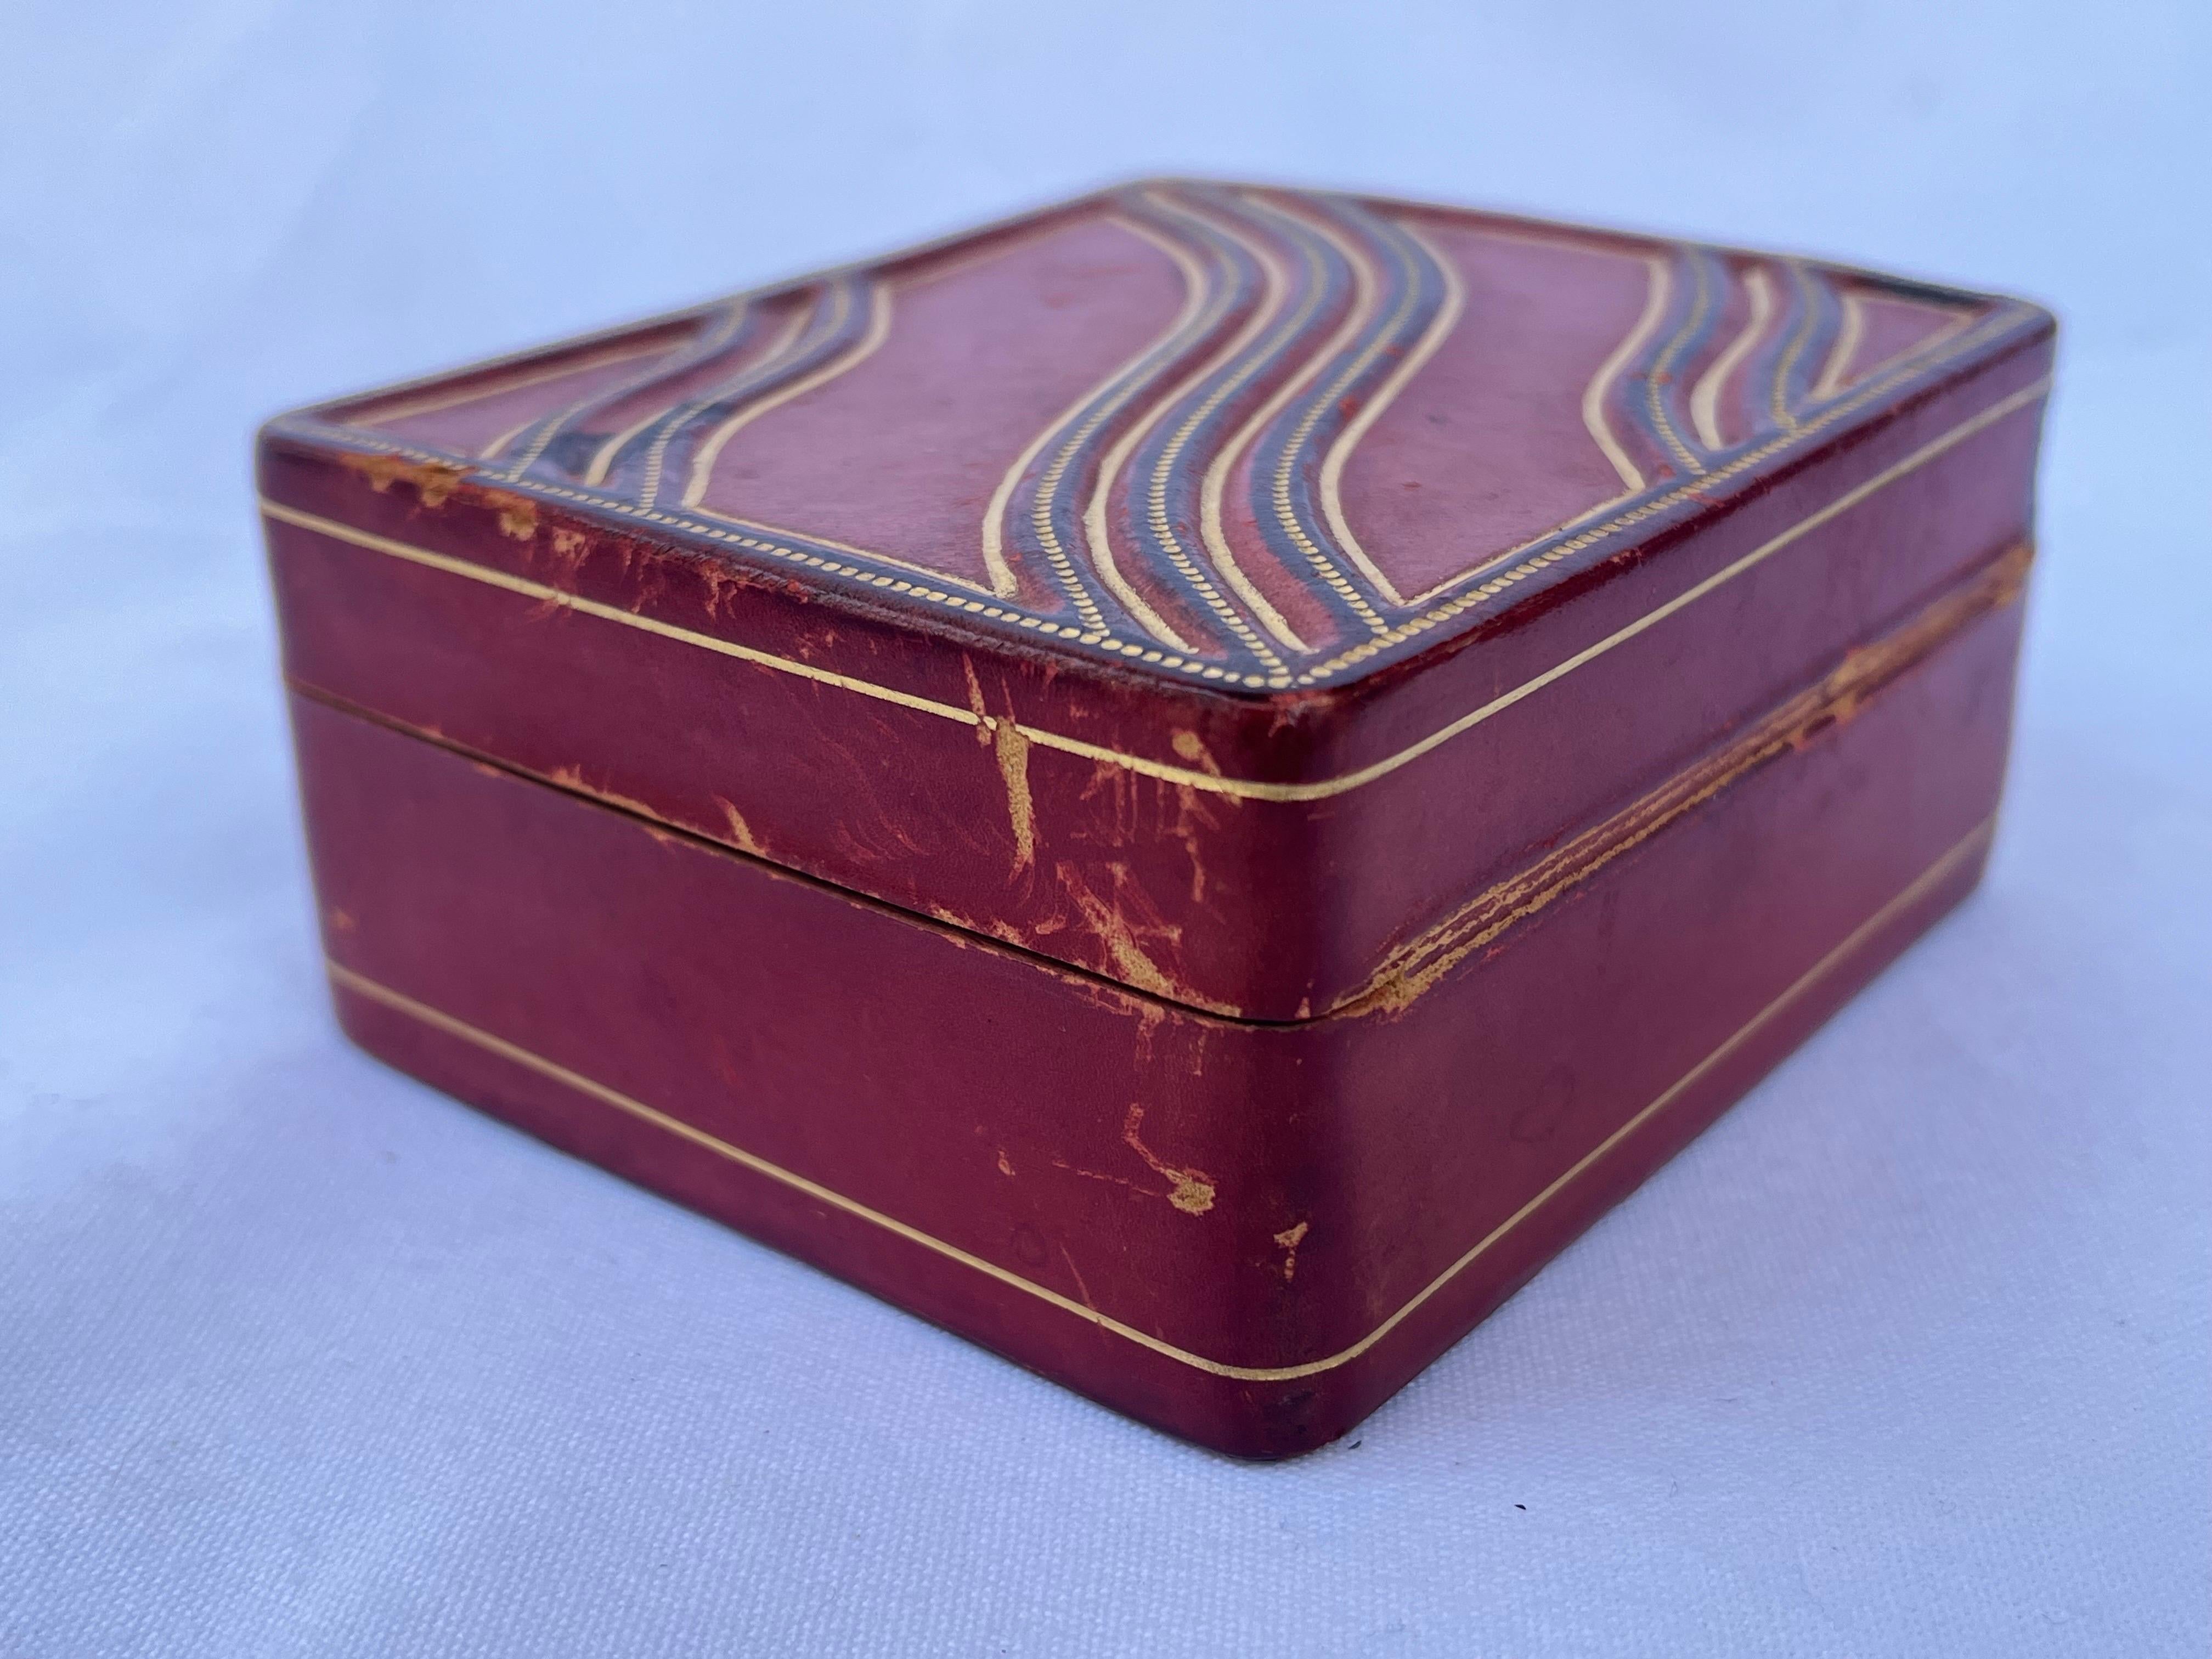 Mid-Century Modern Italian Leather and Gold Gilt Embossed Trinket Box Desk Accessory from Firenze 